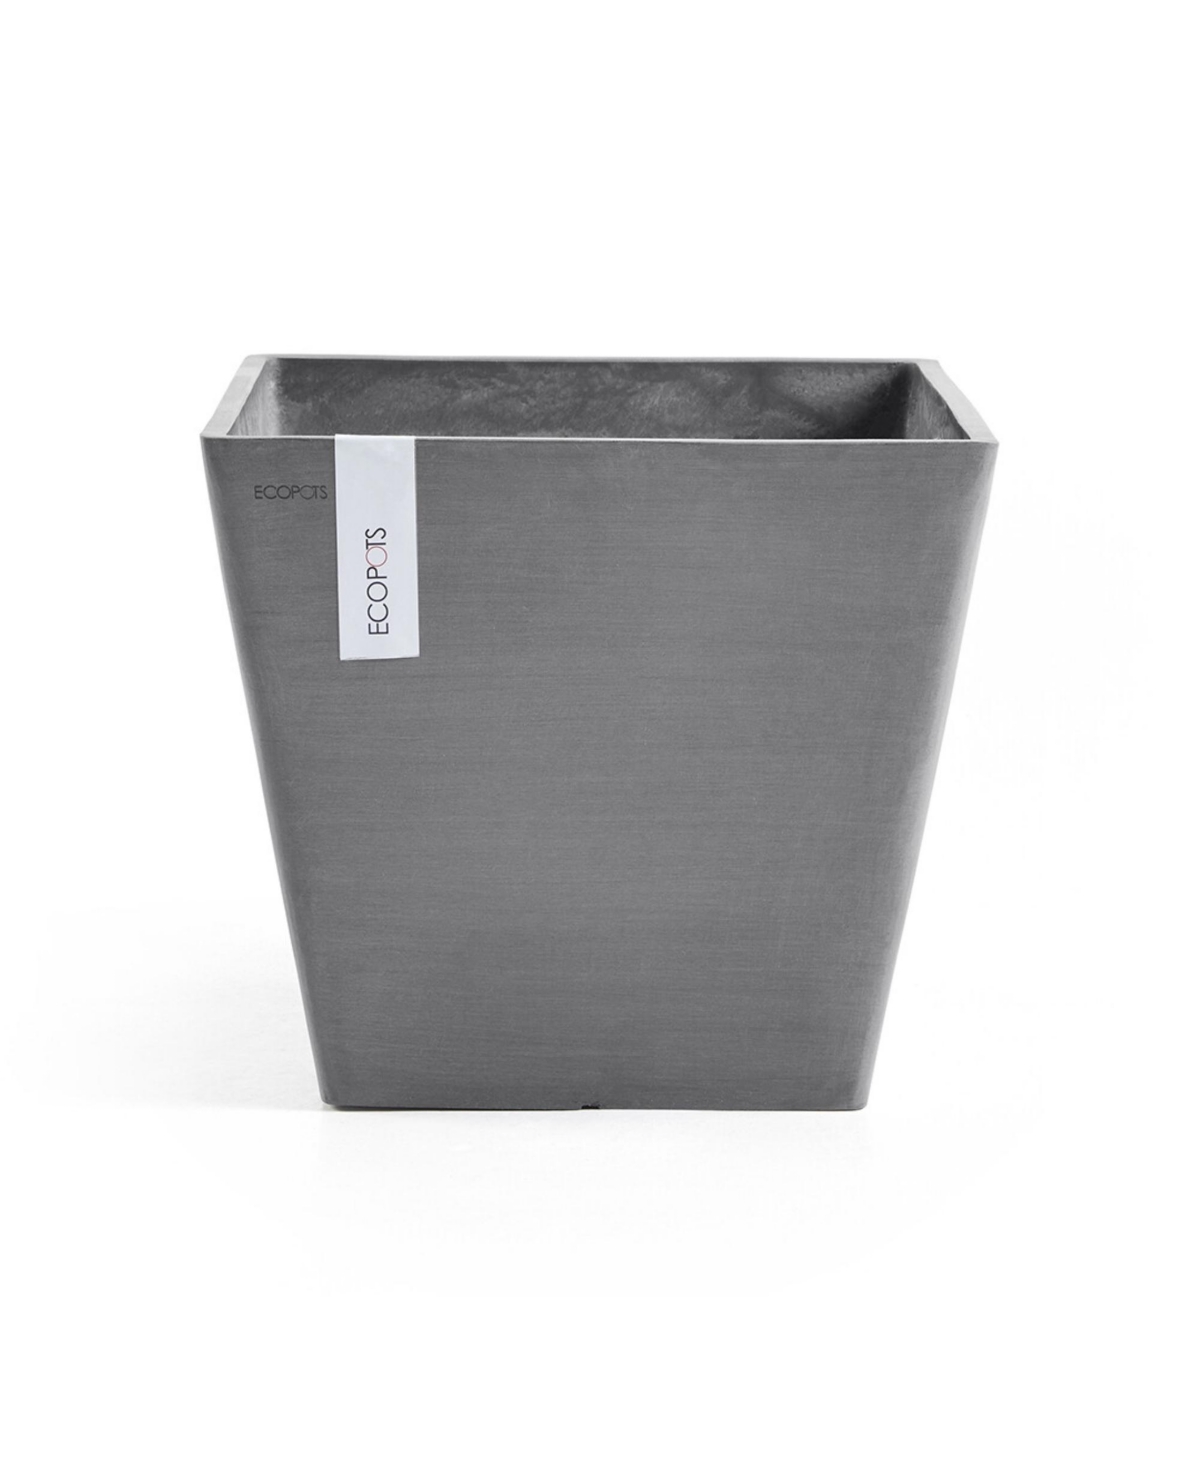 Rotterdam Indoor and Outdoor Square Planter, 12in - Grey